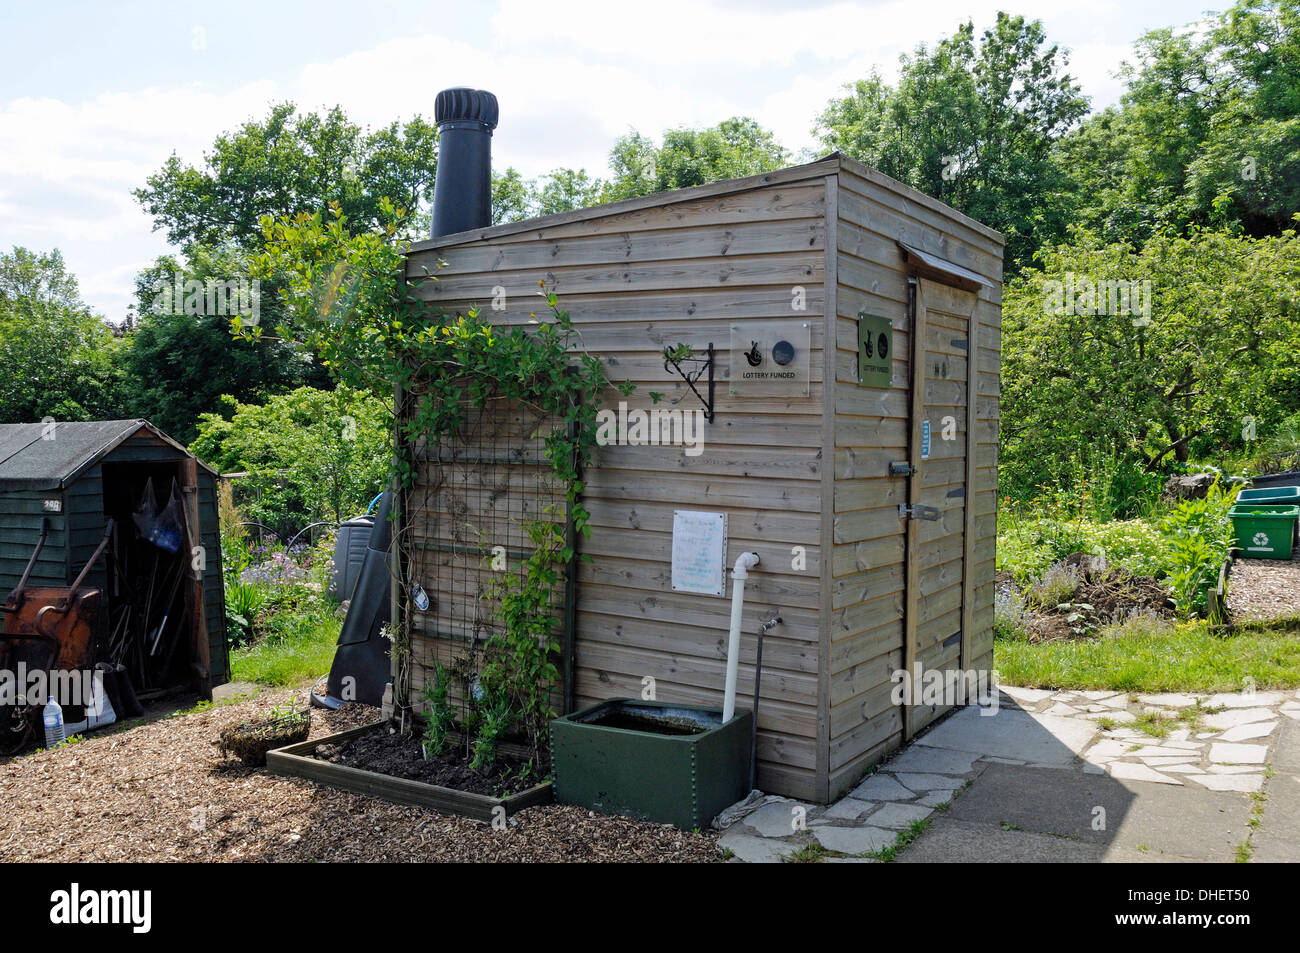 Compost toilet or lavatory with stench or ventilation pipe showing at rear Alexandra Palace Allotments Haringey London England Britain UK Stock Photo